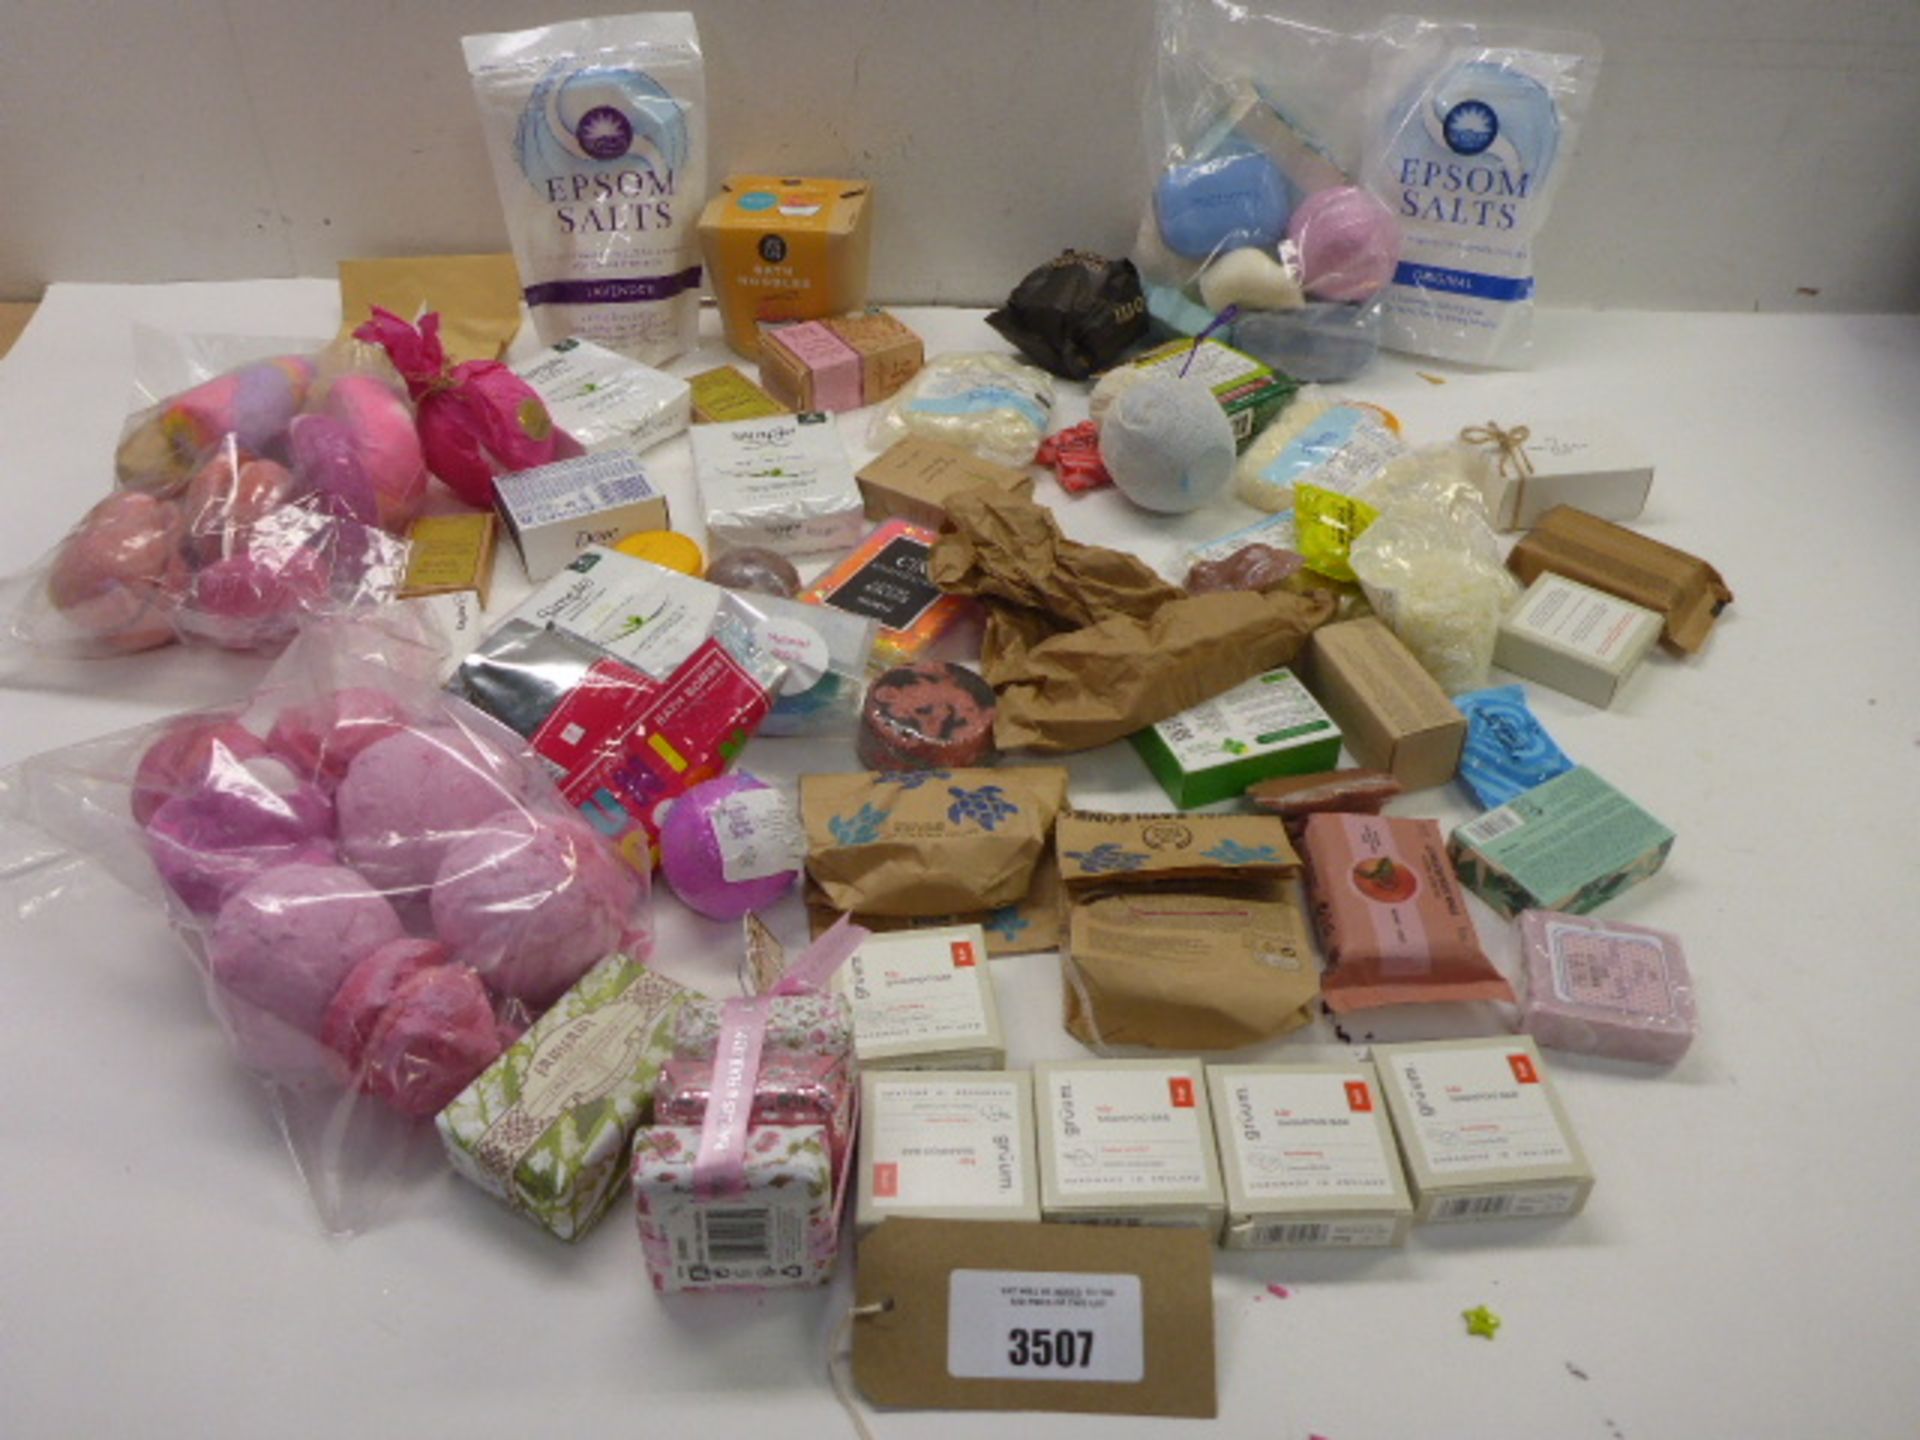 Selection of Gruum and other soaps, bath bombs, Epsom salts, bath noodles, shea butter etc